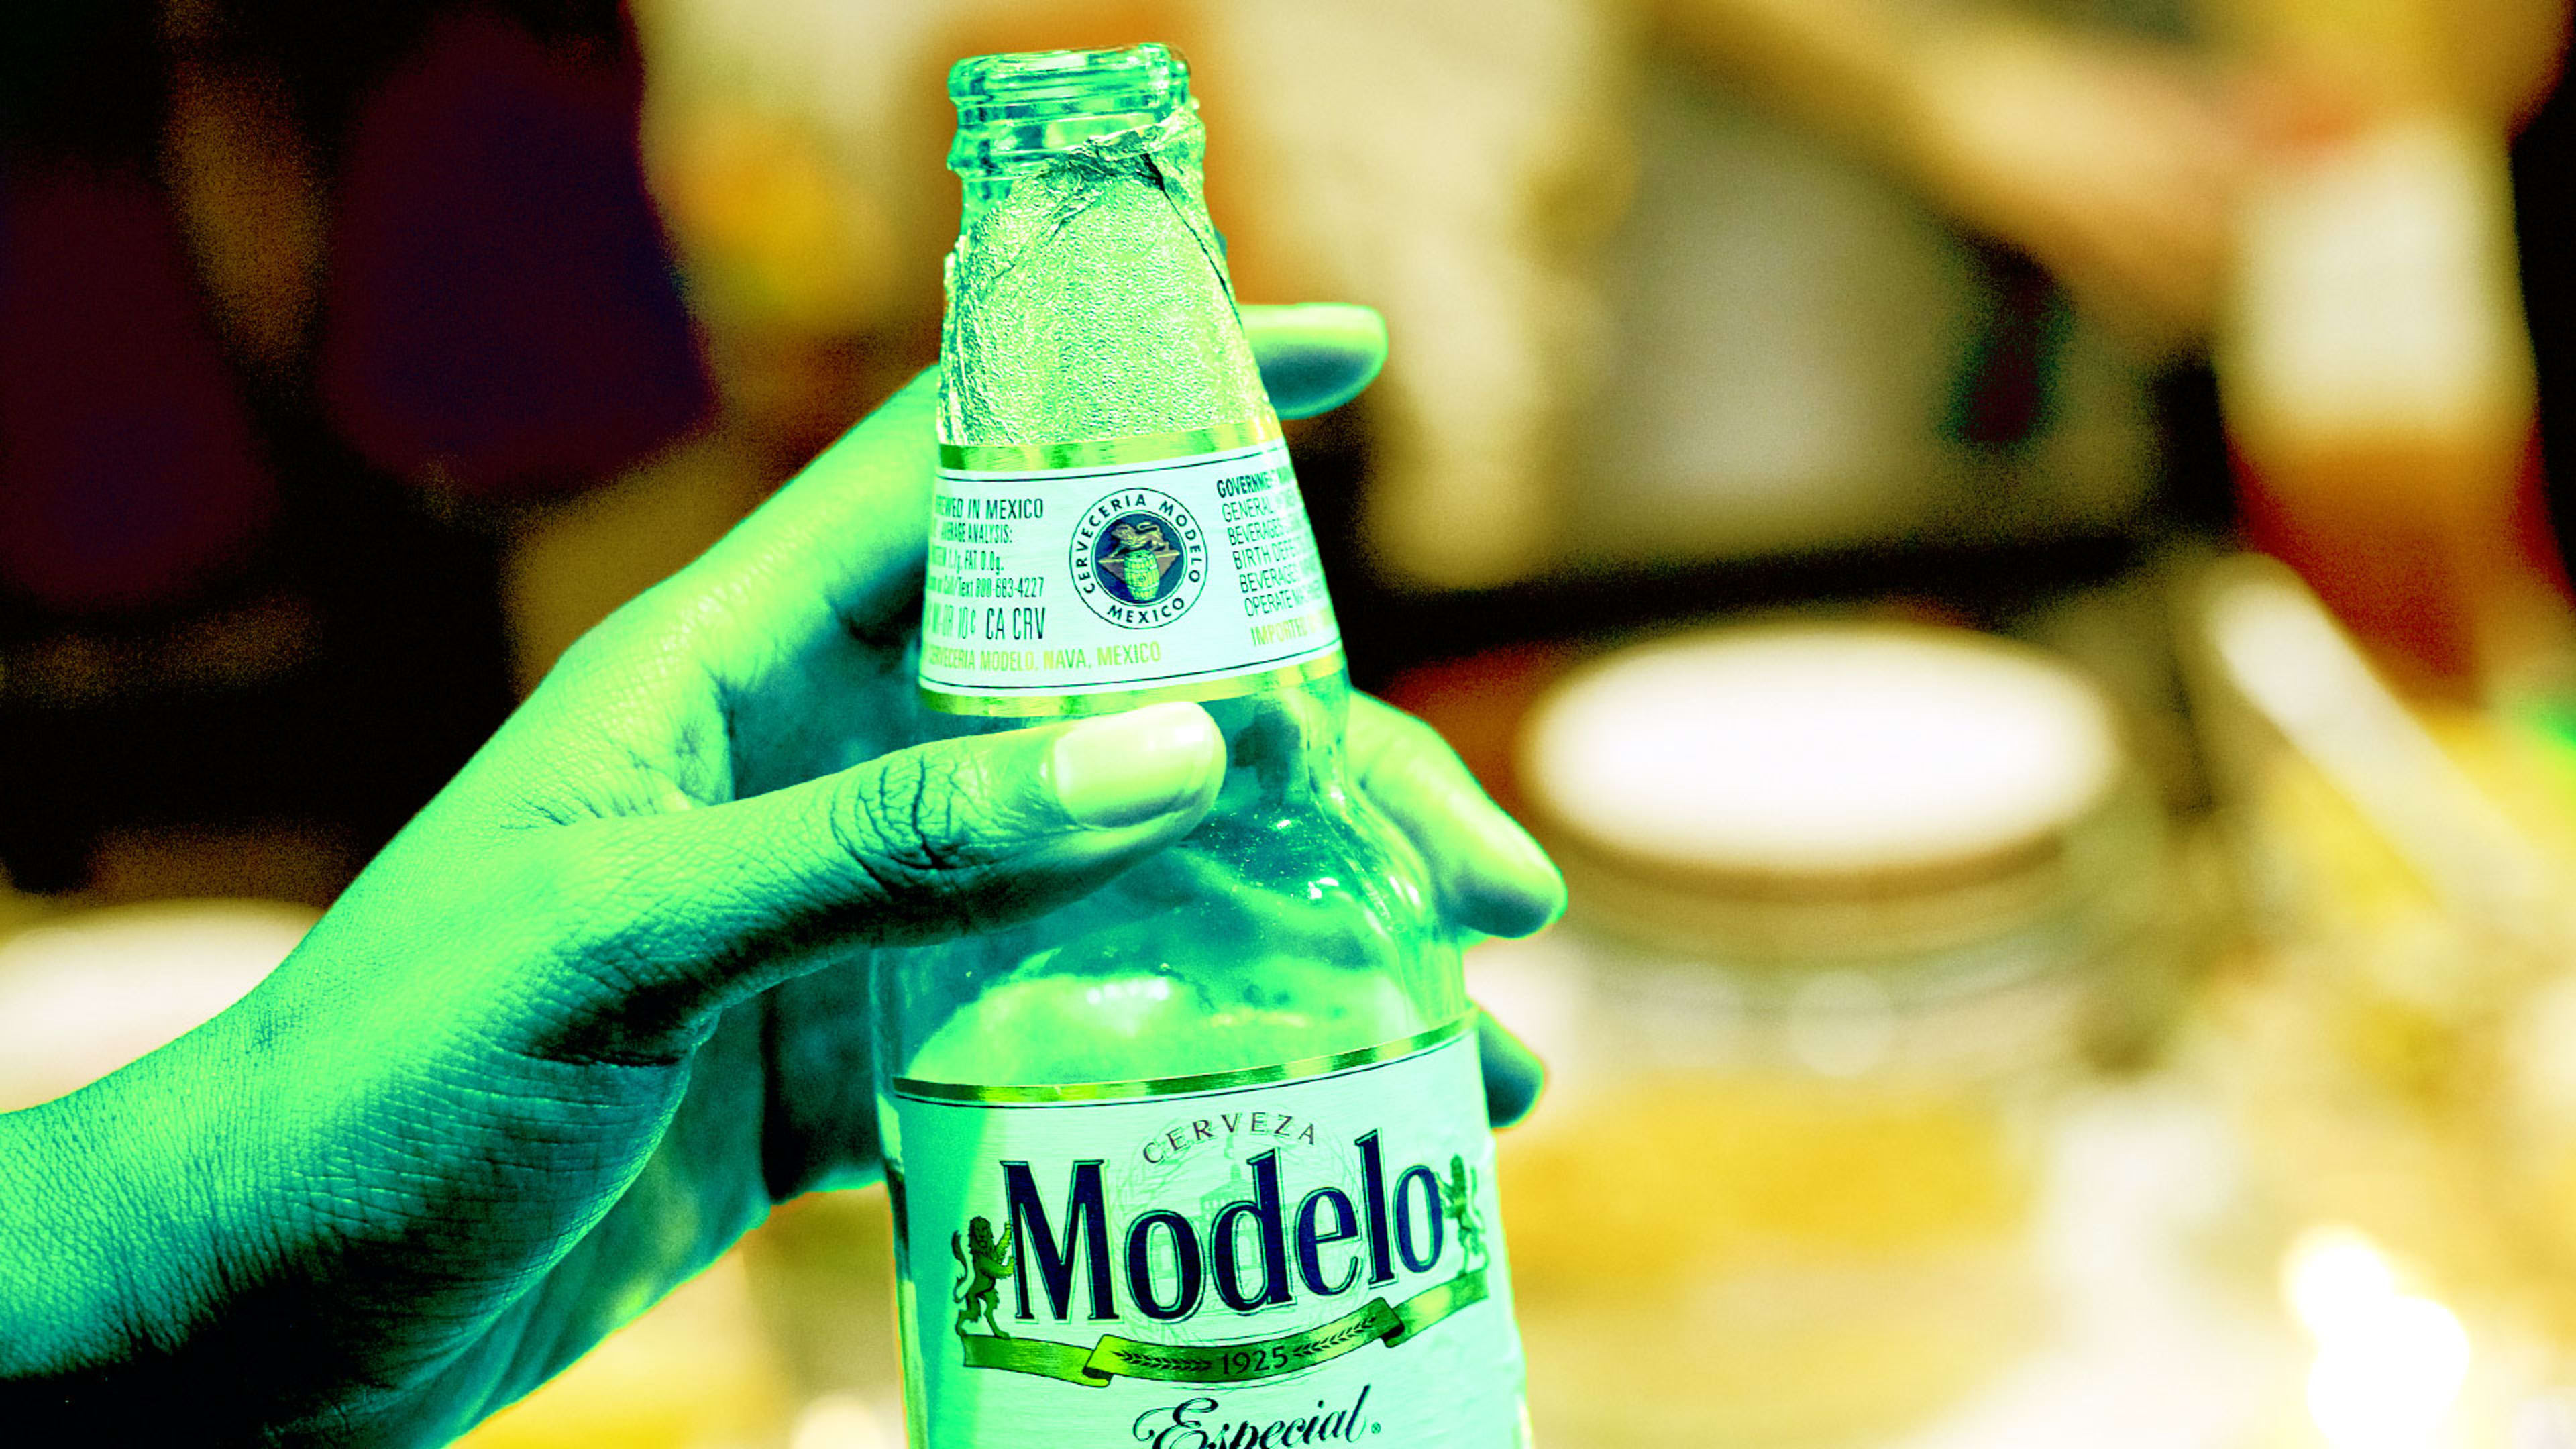 How Modelo is using Mexican-flavored experiments in a push to become America’s No. 1 beer